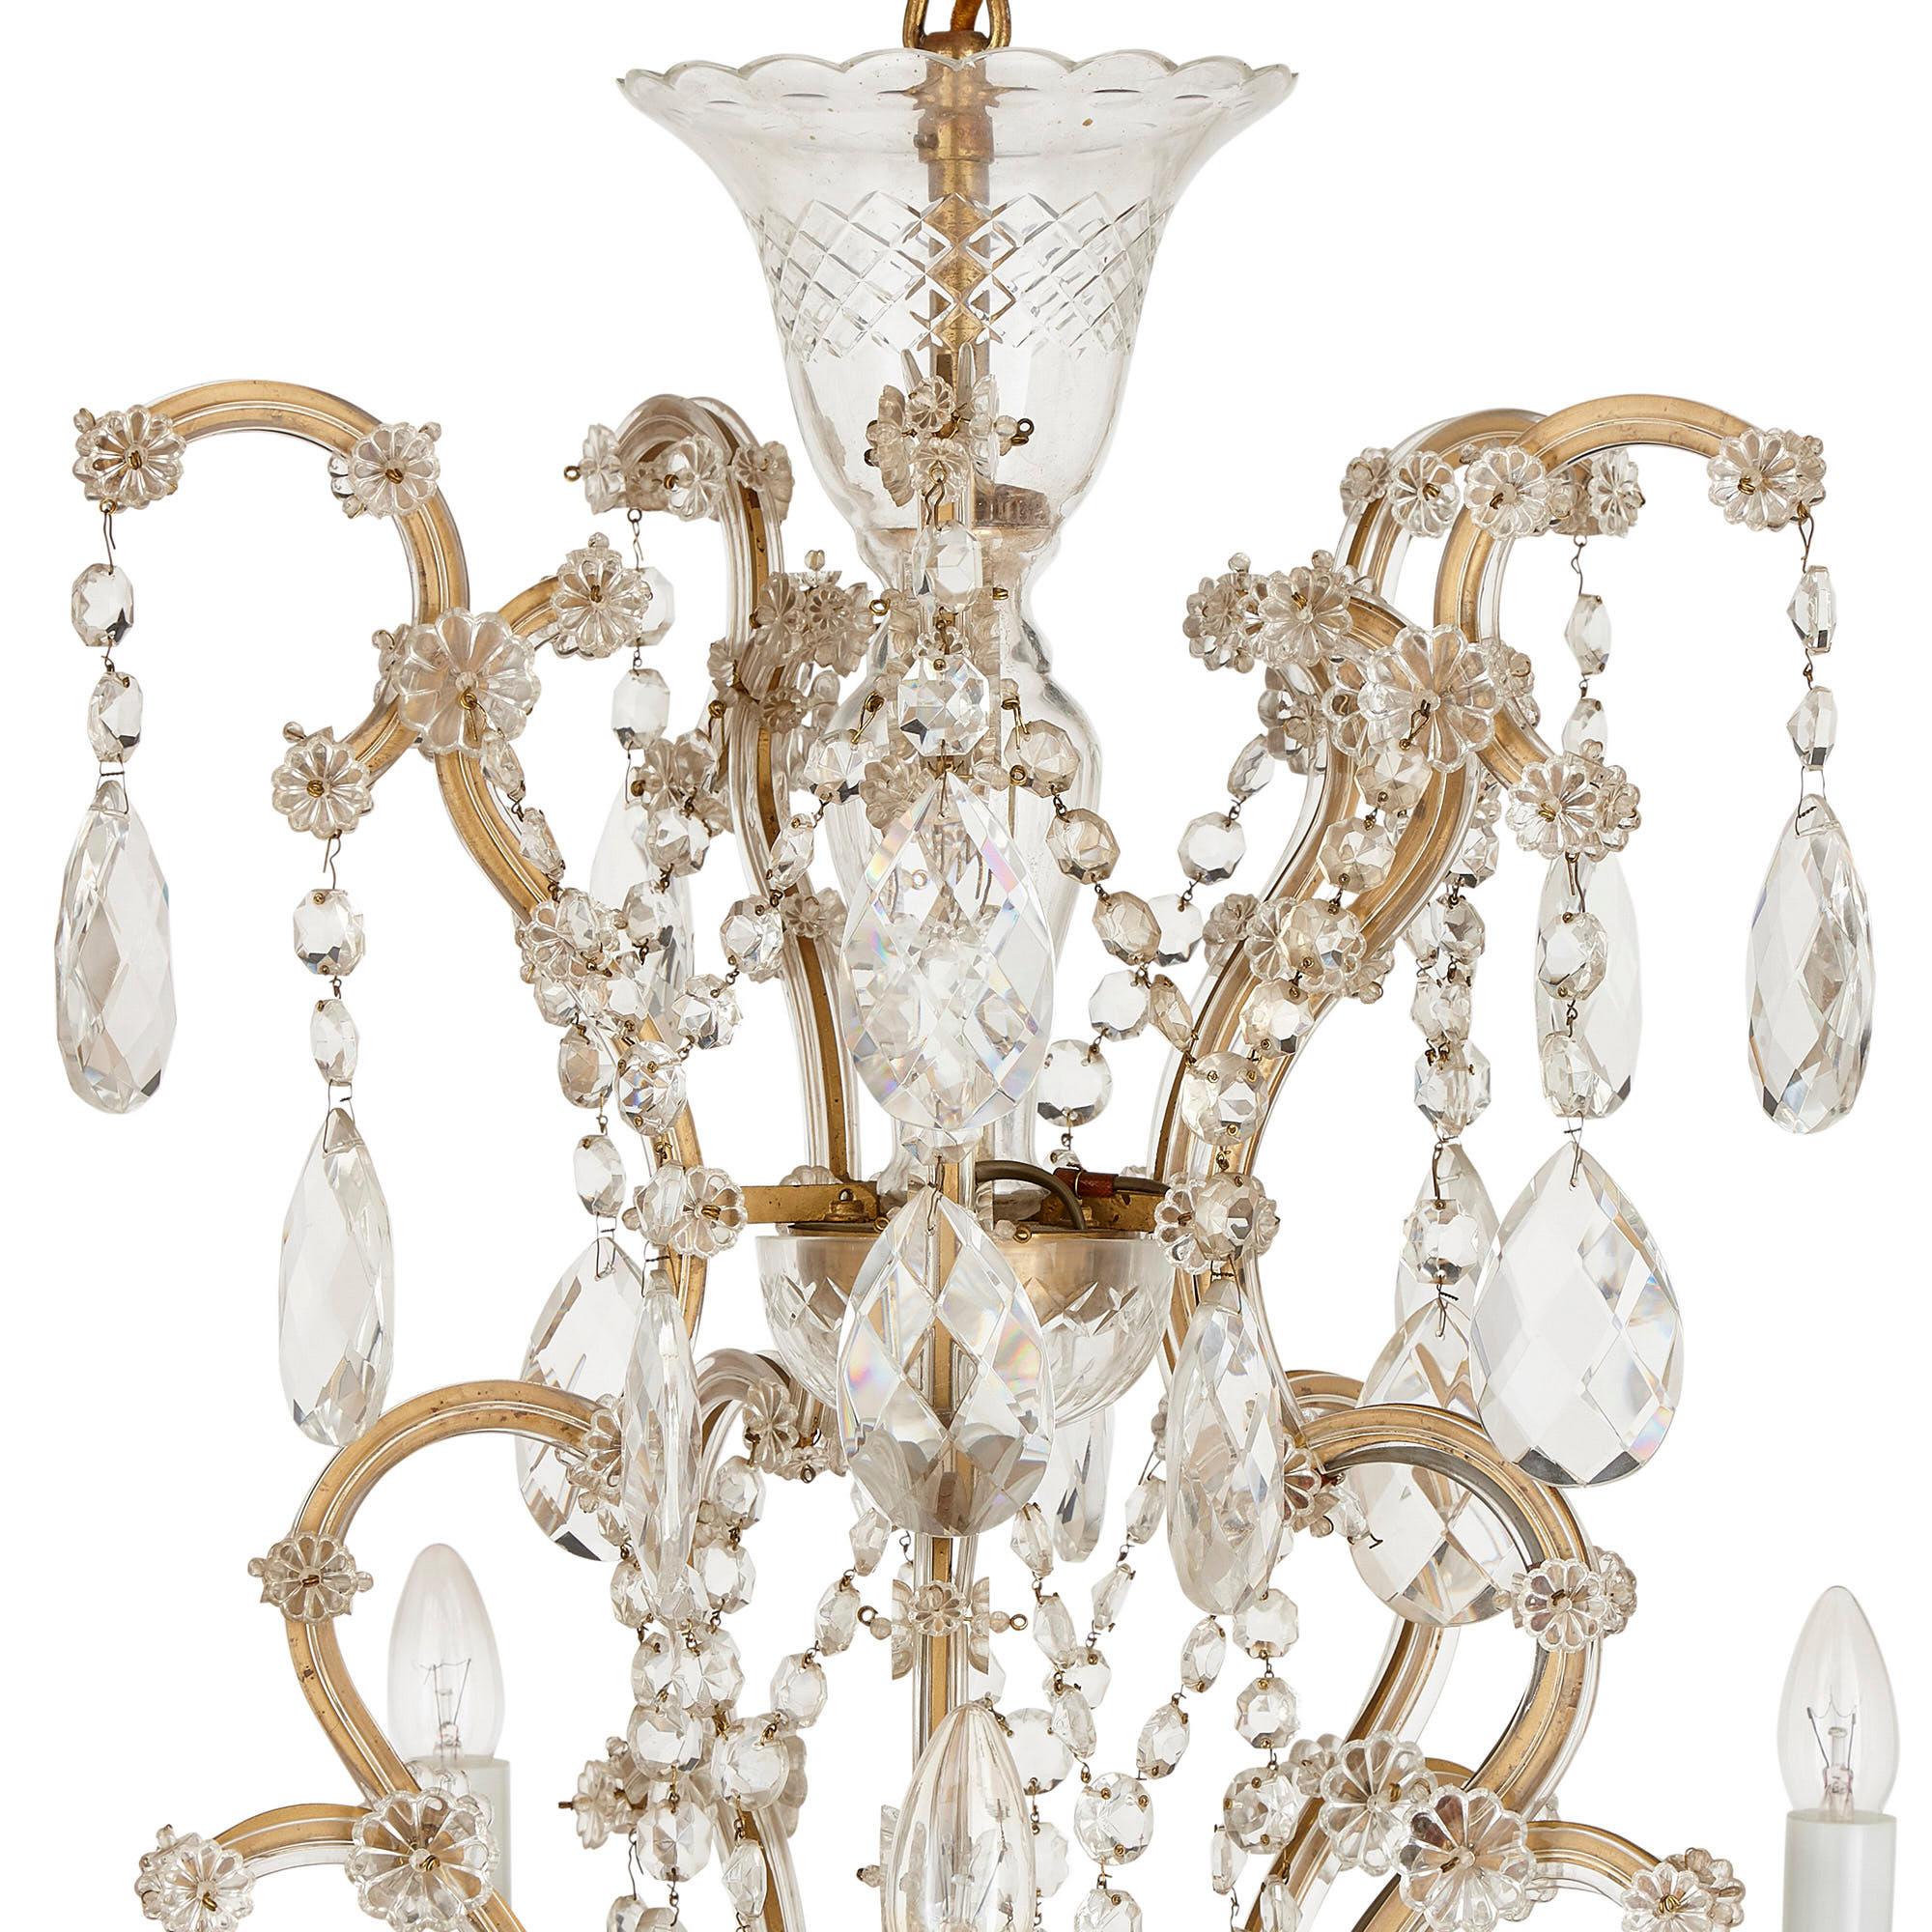 Bohemian facet cut glass Rococo style chandelier
Bohemian, 20th Century
Height 109cm, diameter 101cm

This luxurious chandelier is crafted in the Bohemian manner from wonderfully faceted cut glass. The chandelier features light branches arranged